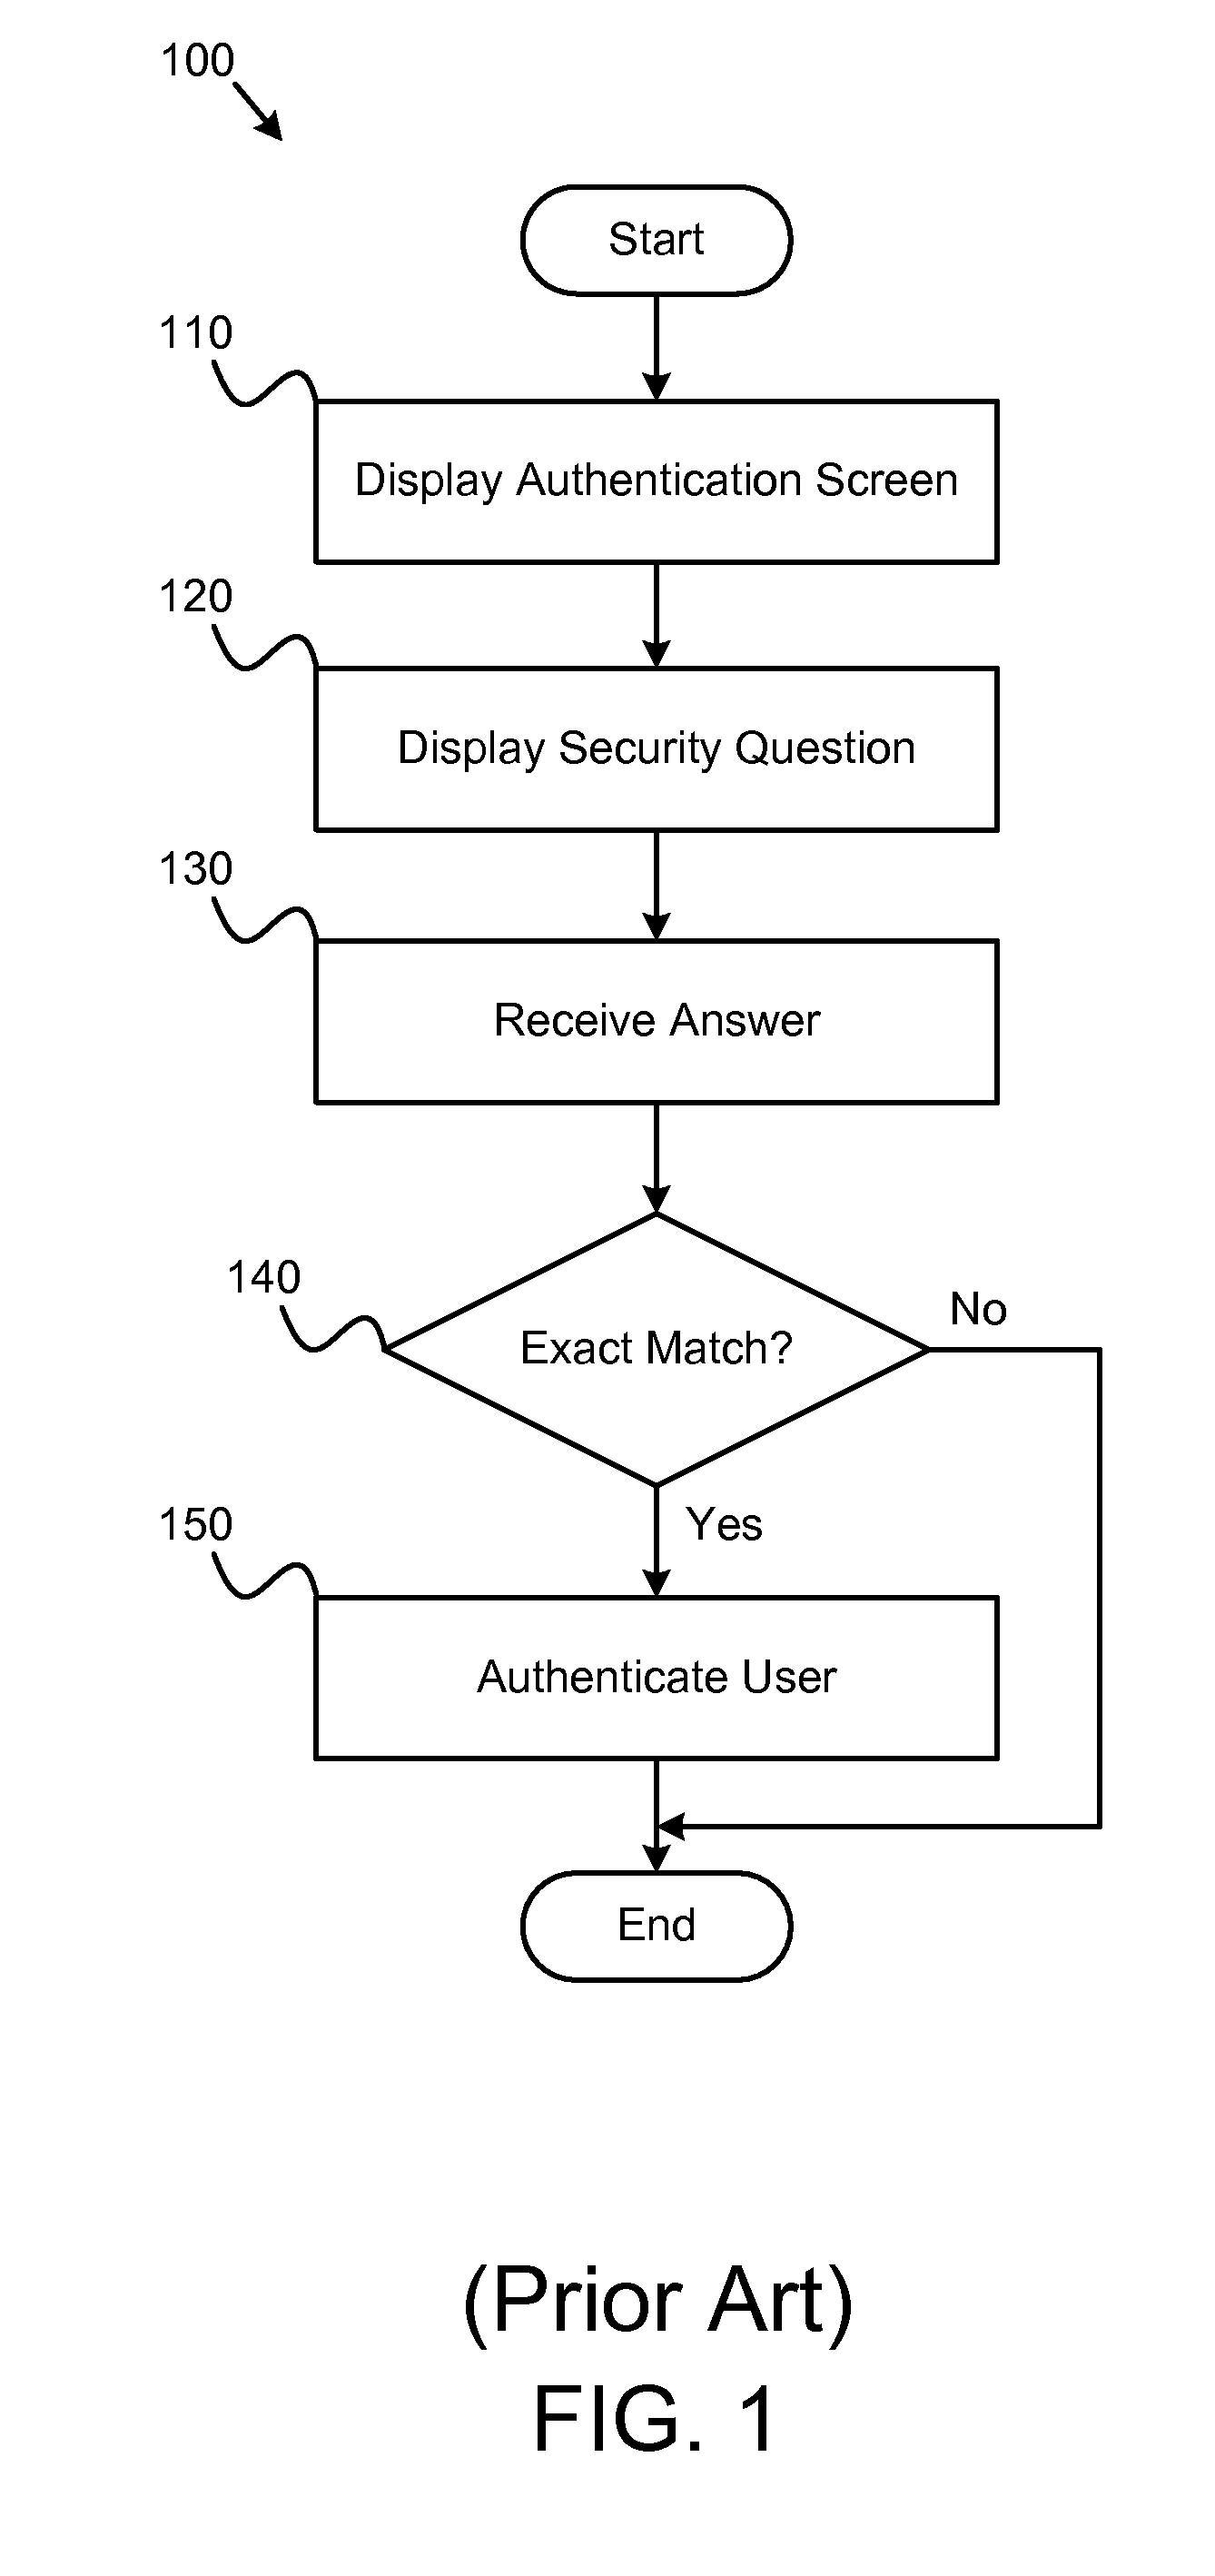 Apparatus system and method for validating users based on fuzzy logic